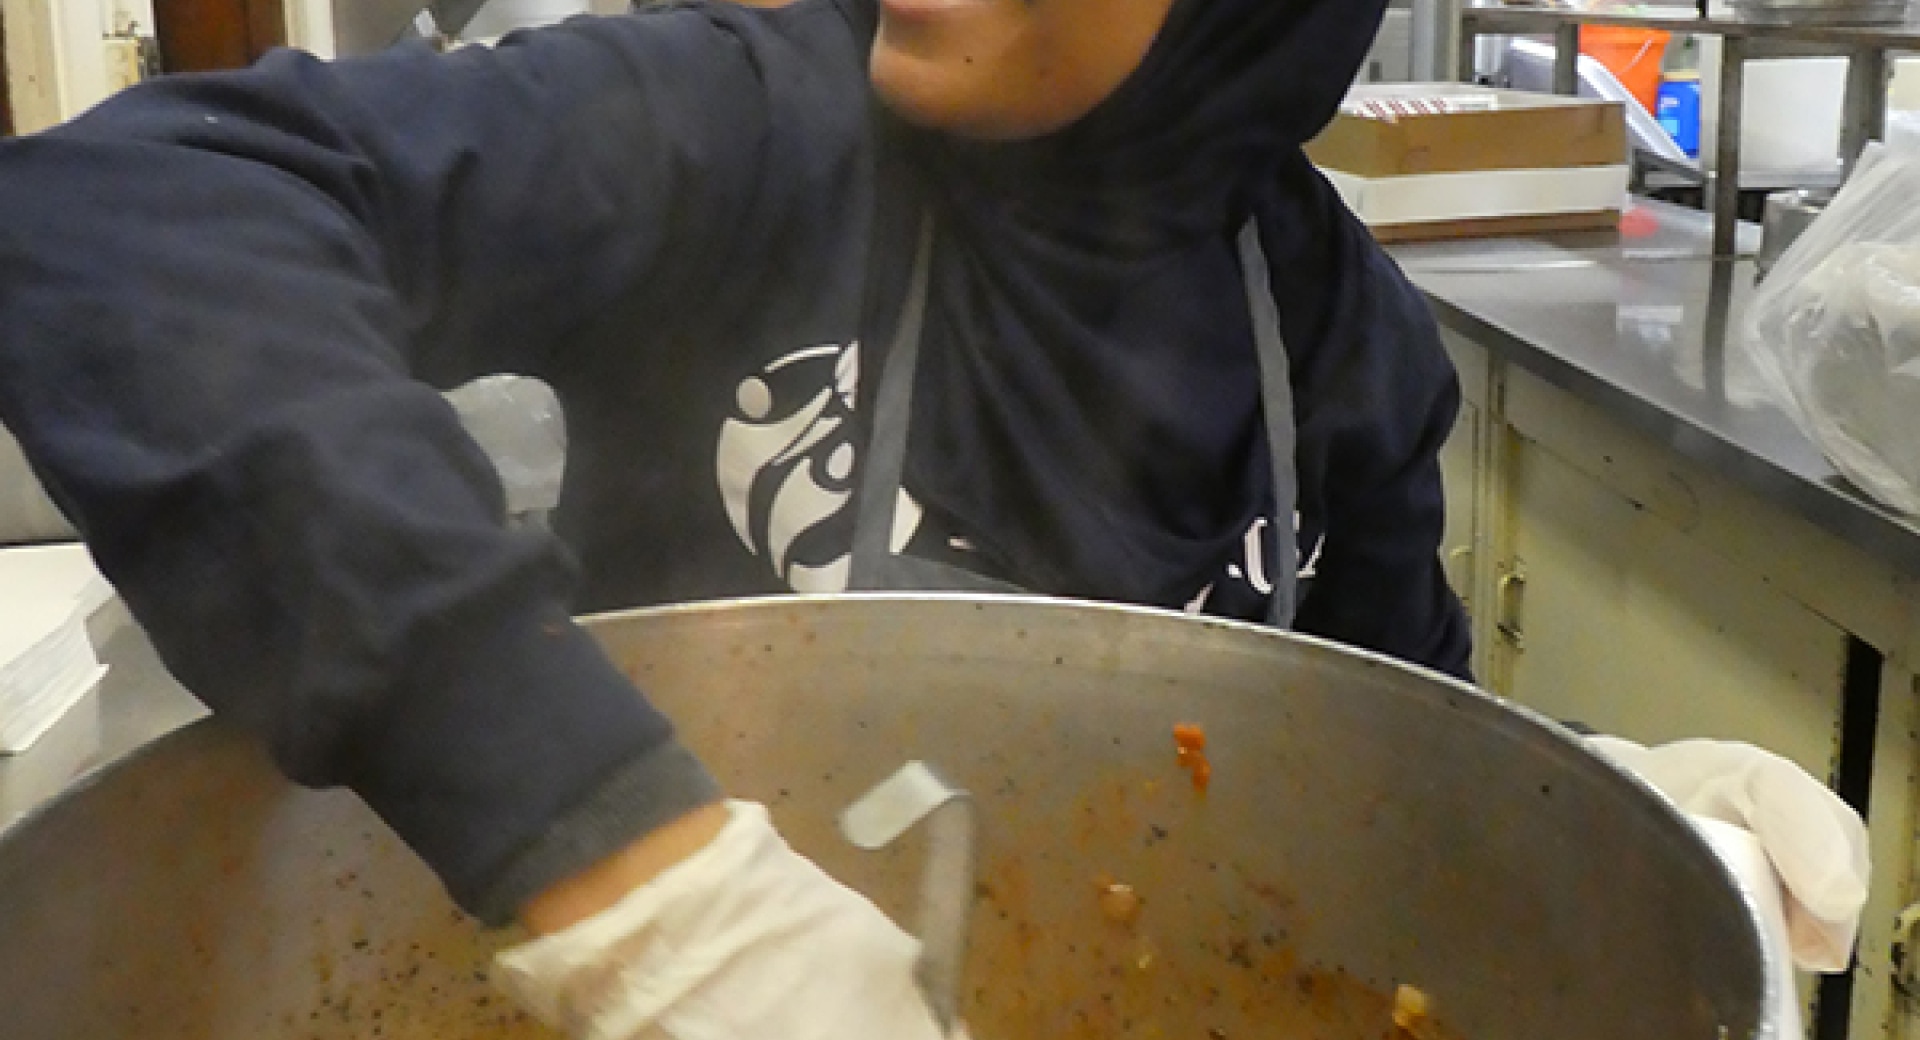 MUSLIM VOLUNTEERS TO RELIEVE CHRISTIAN VOLUNTEERS ON CHRISTMAS EVE AT MANNA COMMUNITY MEAL SOUP KITCHEN